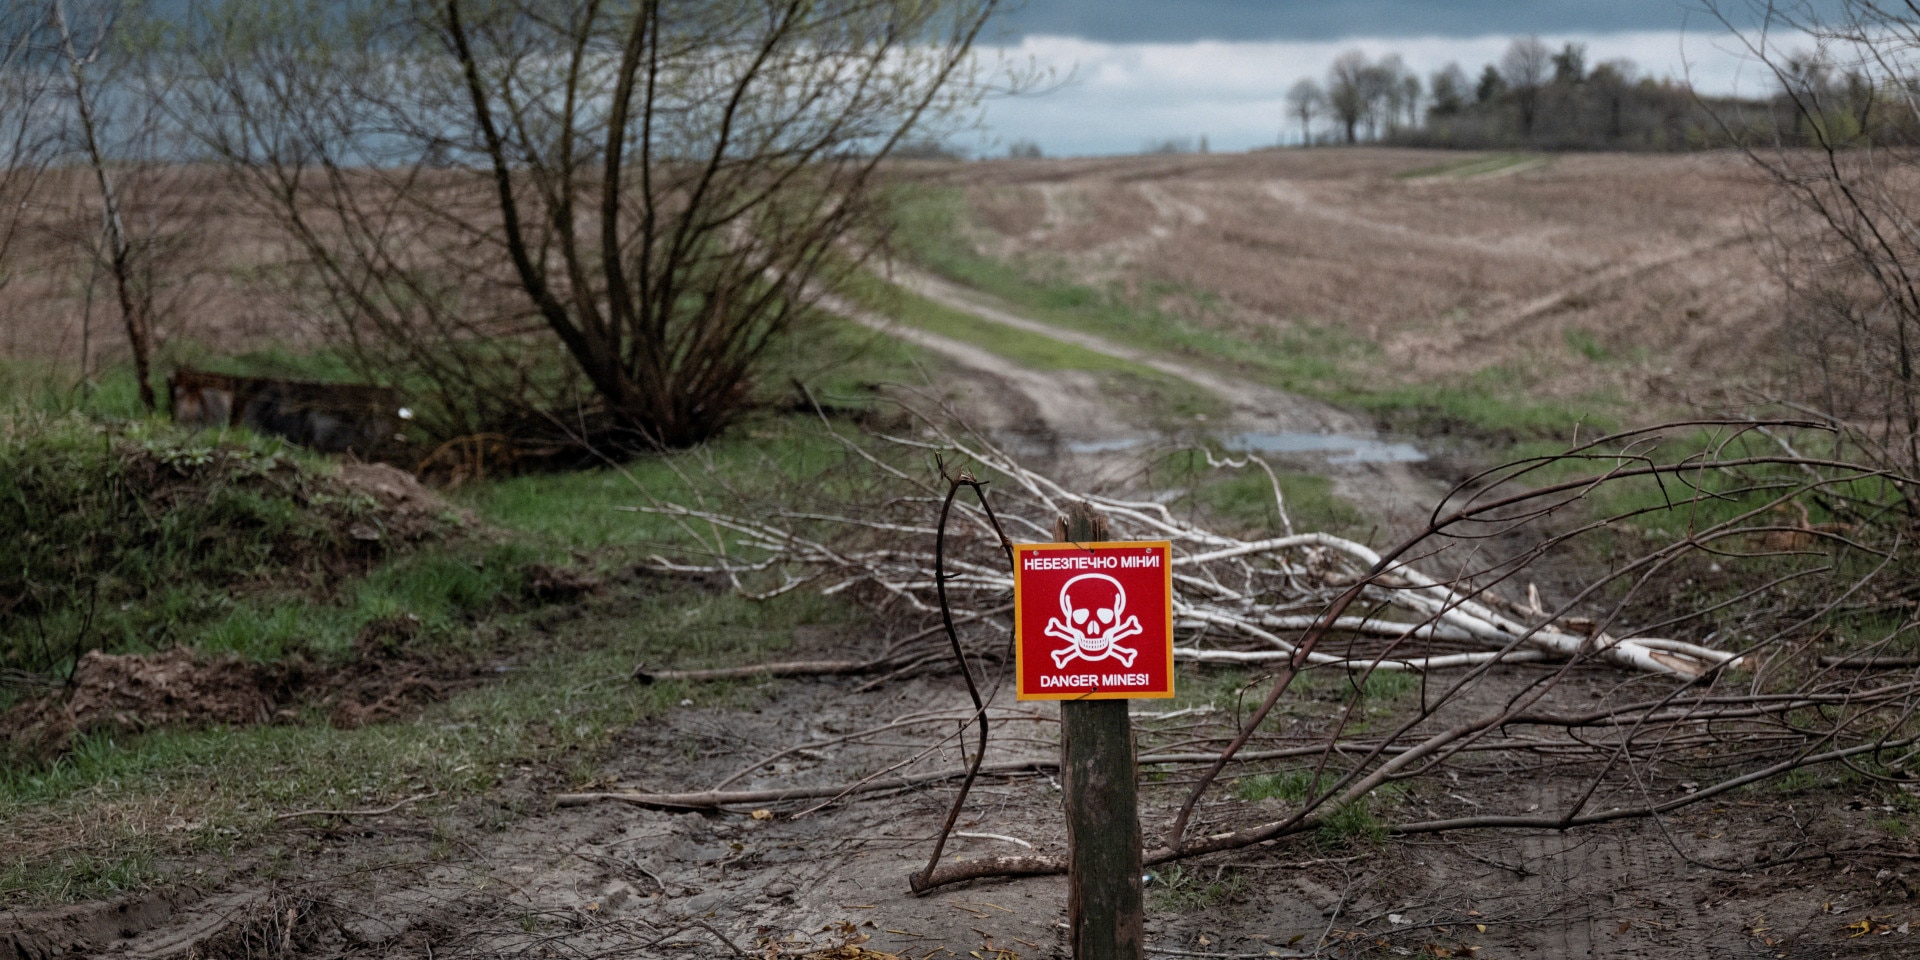 A red sign with a skull and crossbones is on a path and warns of a minefield.